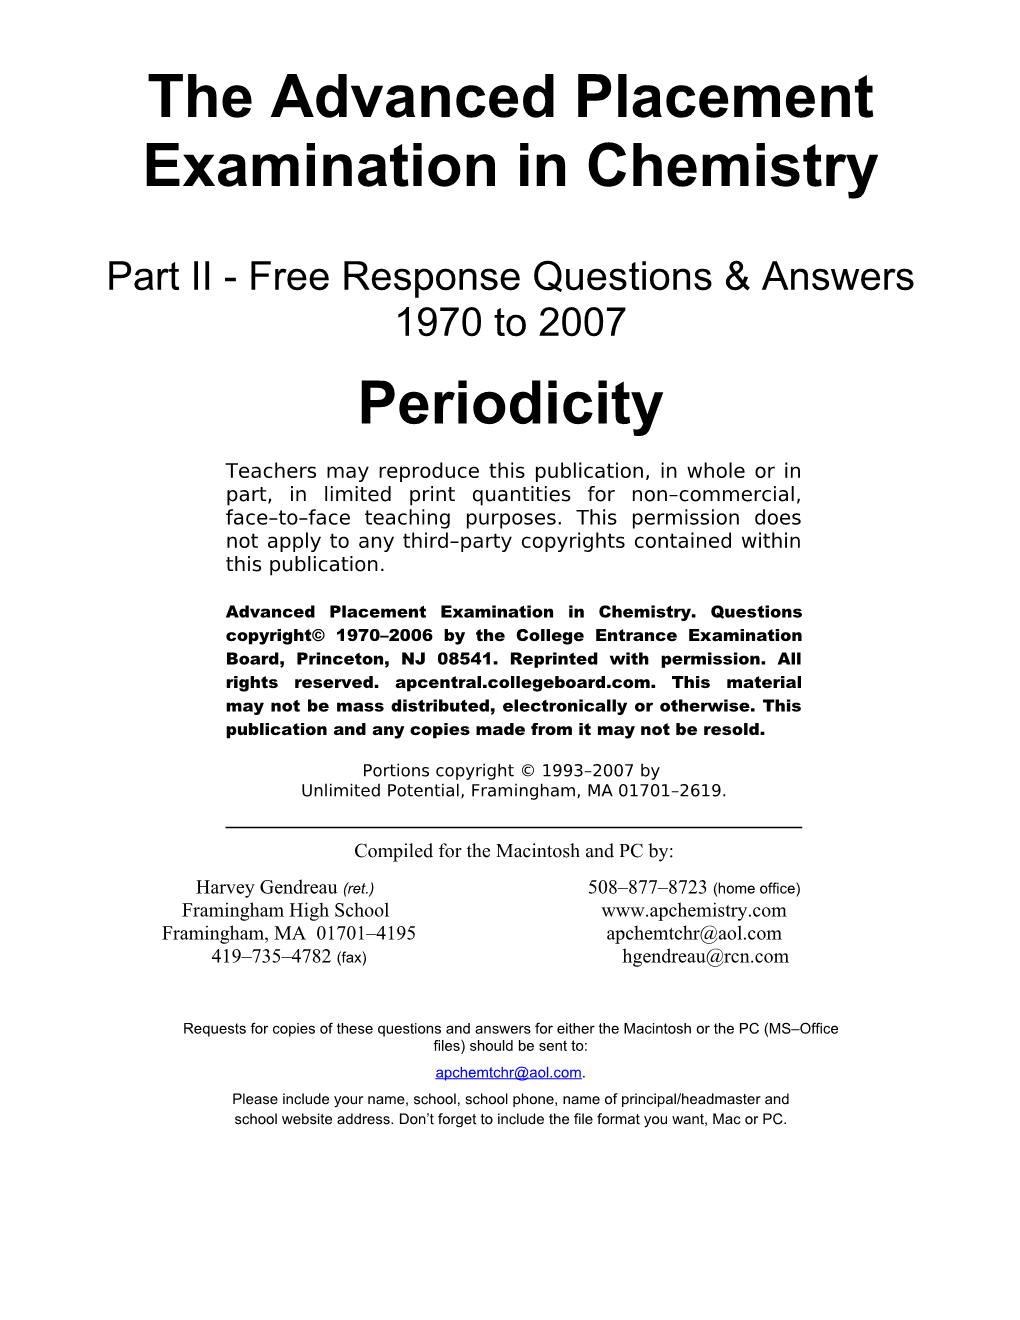 The Advanced Placement Examination in Chemistry